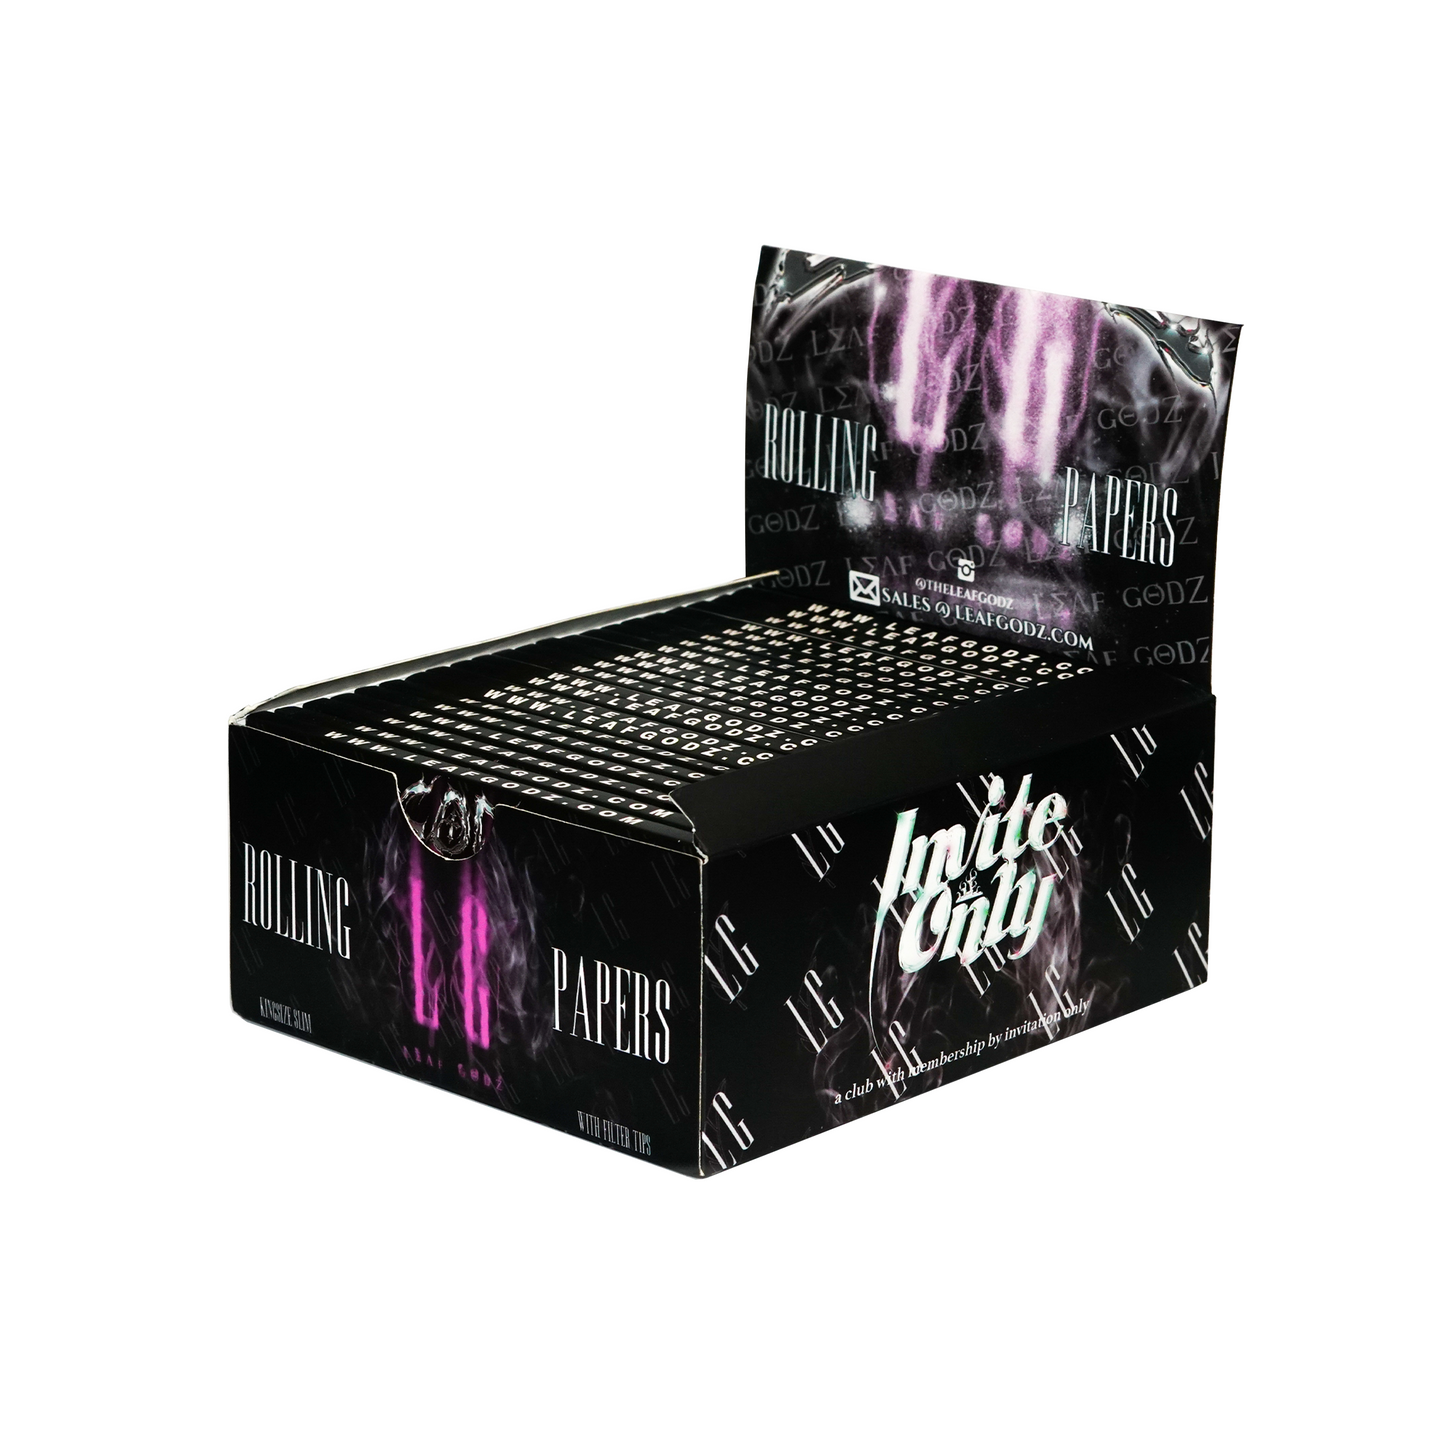 22 Booklet Box "Classic" Rolling Papers With Filters